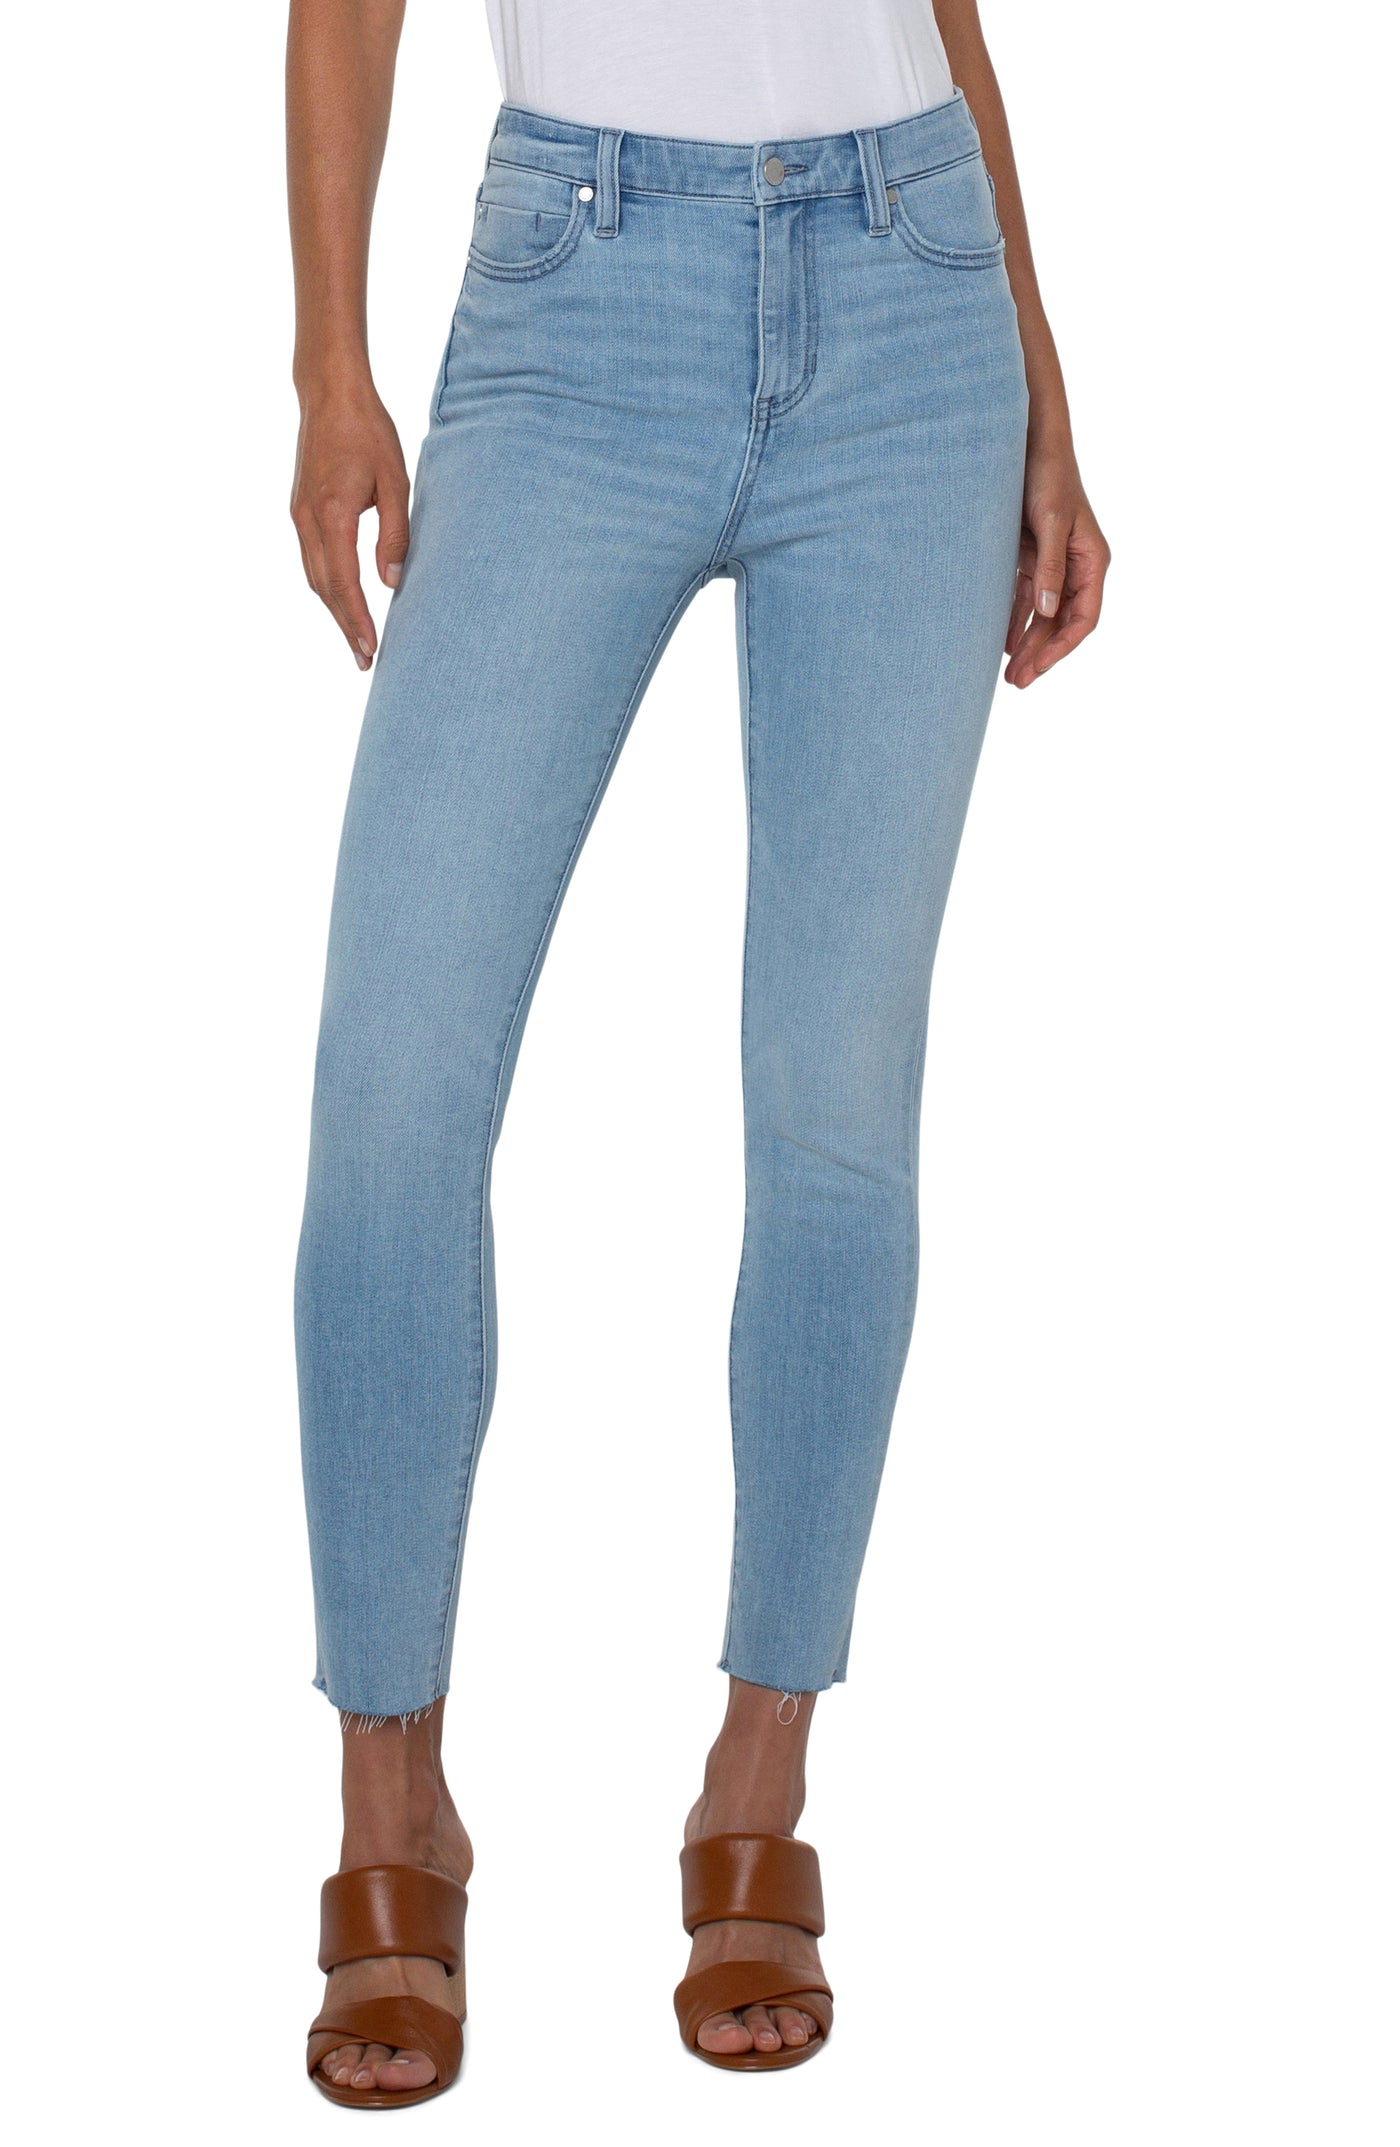 ABBY HIGH RISE ANKLE SKINNY - keniston 28"